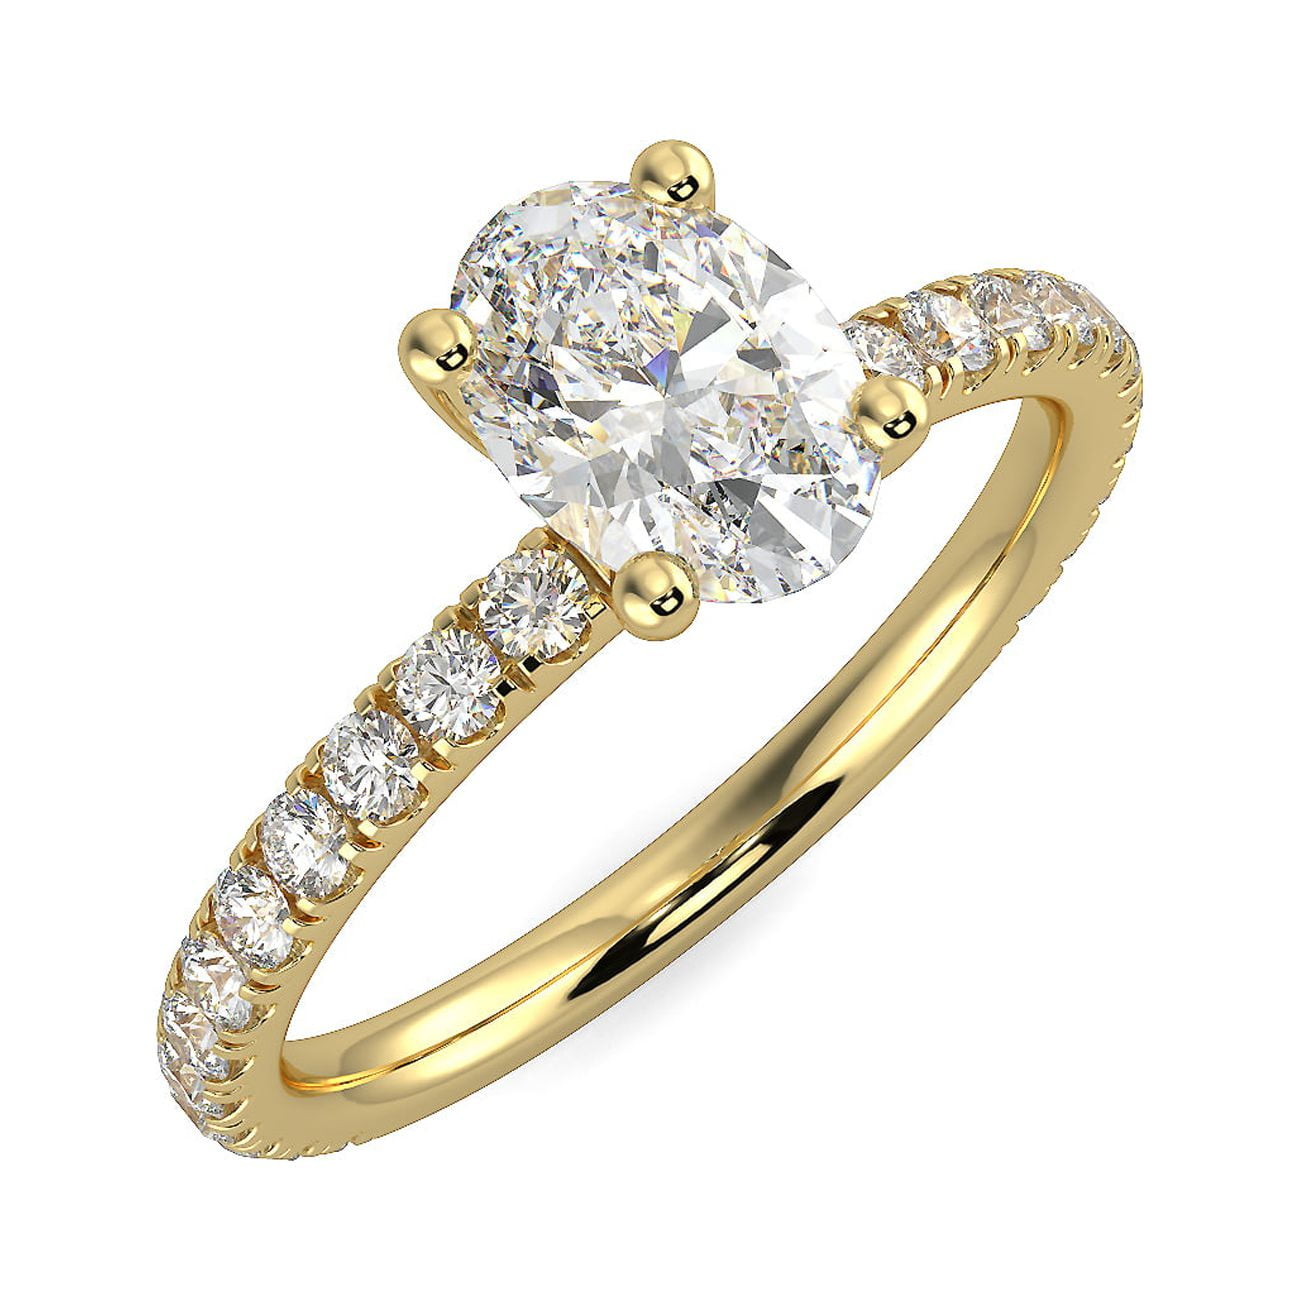 Beverly Hills Jewelers 3 Carat Total Weight Diamond Engagement Ring In 14  Karat White Gold Stunningly Hand Crafted (5) | Amazon.com